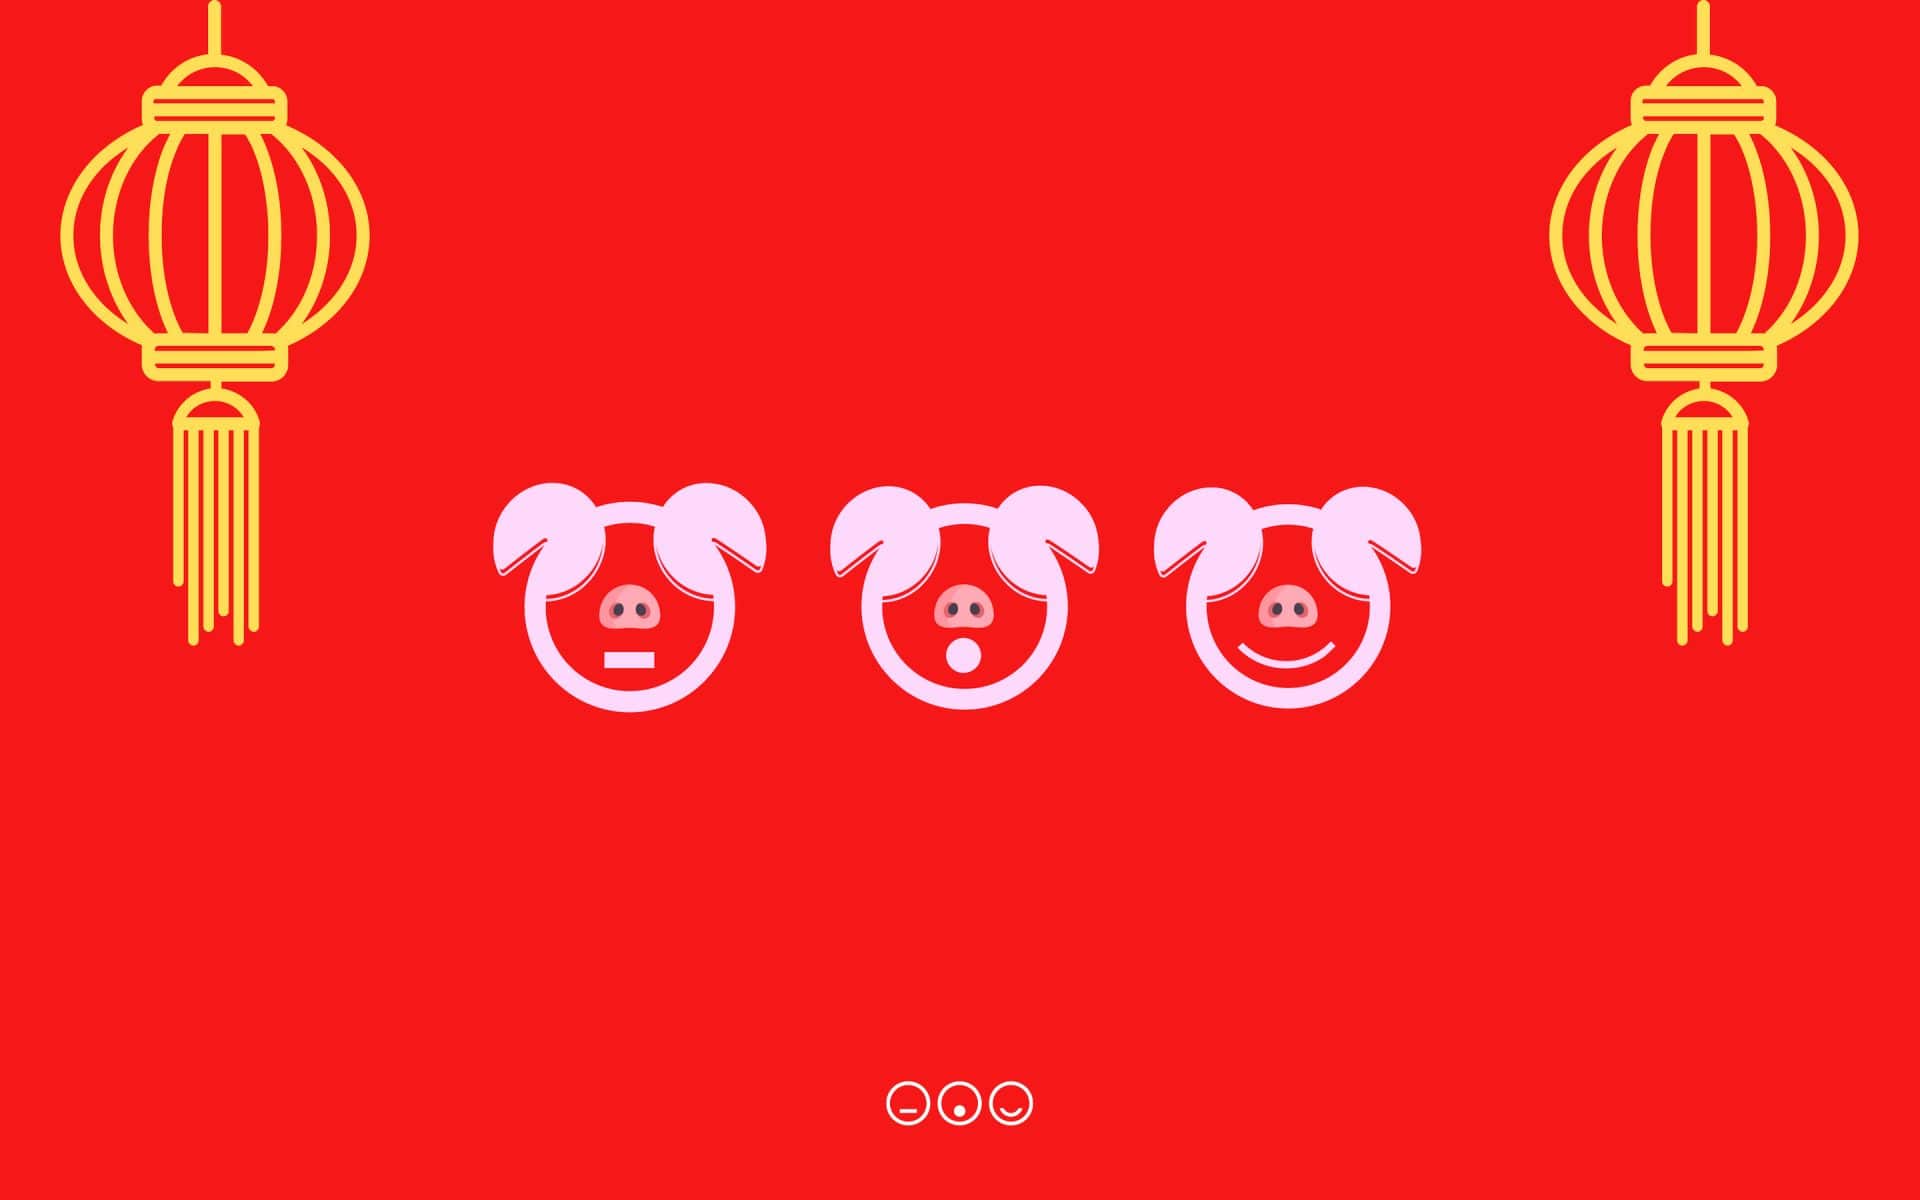 It's the Year of the Pig! Download your Chinese New Year